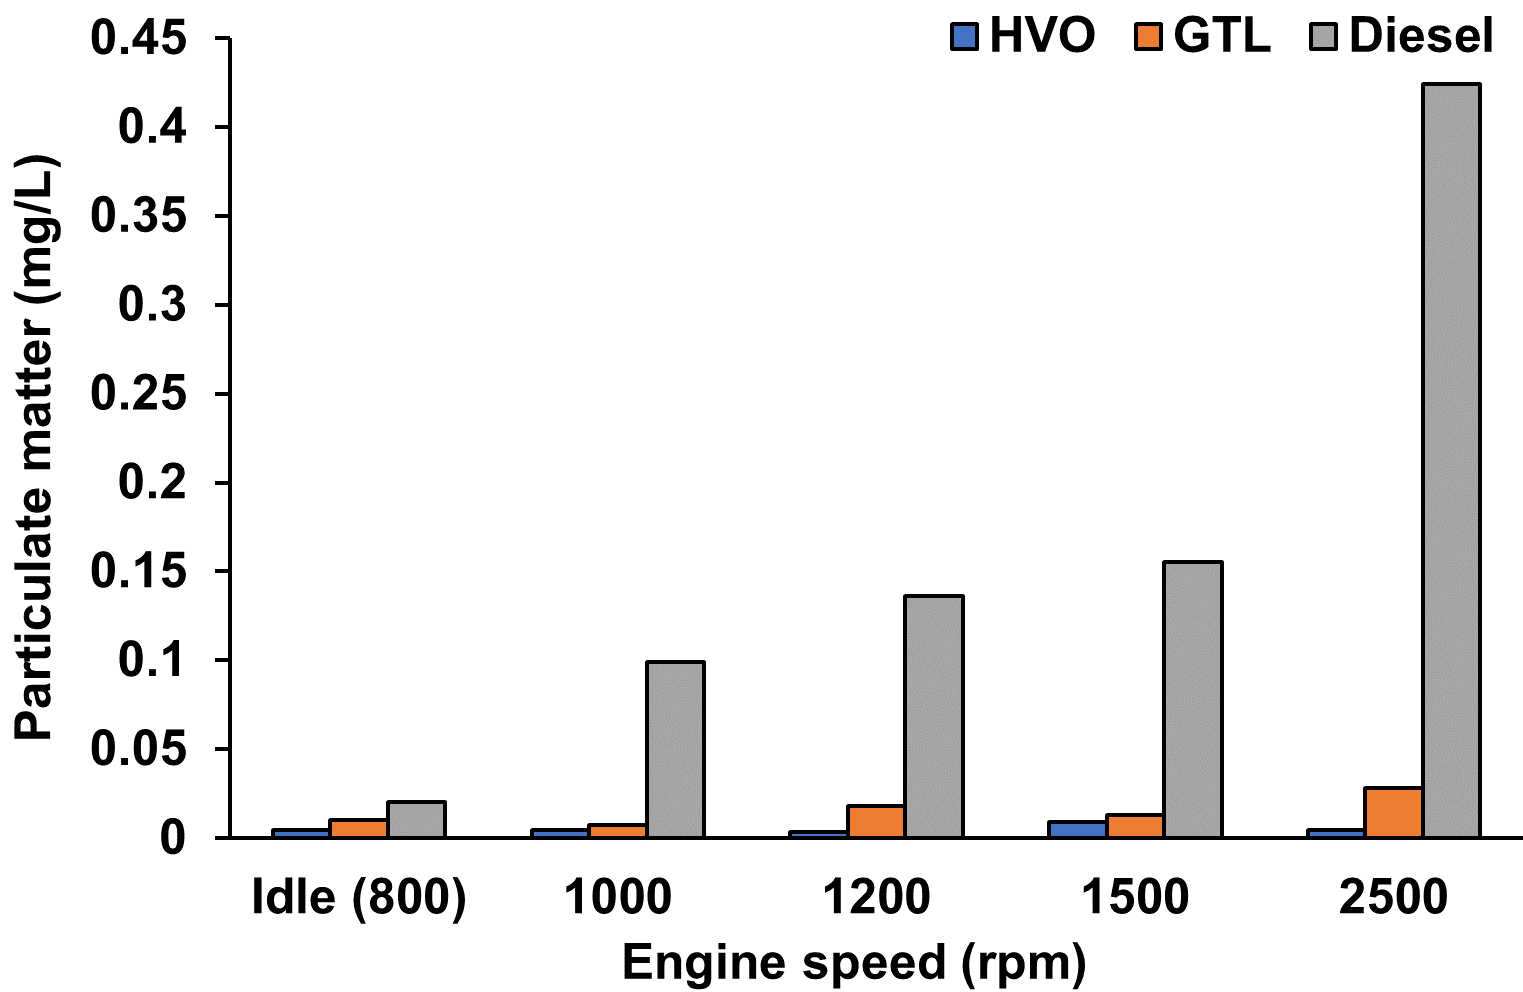 Figure 6 Exhaust gas concentrations of PM (mg/L) from the starboard engine at 5 speed conditions operated on Diesel, GTL, and HVO.